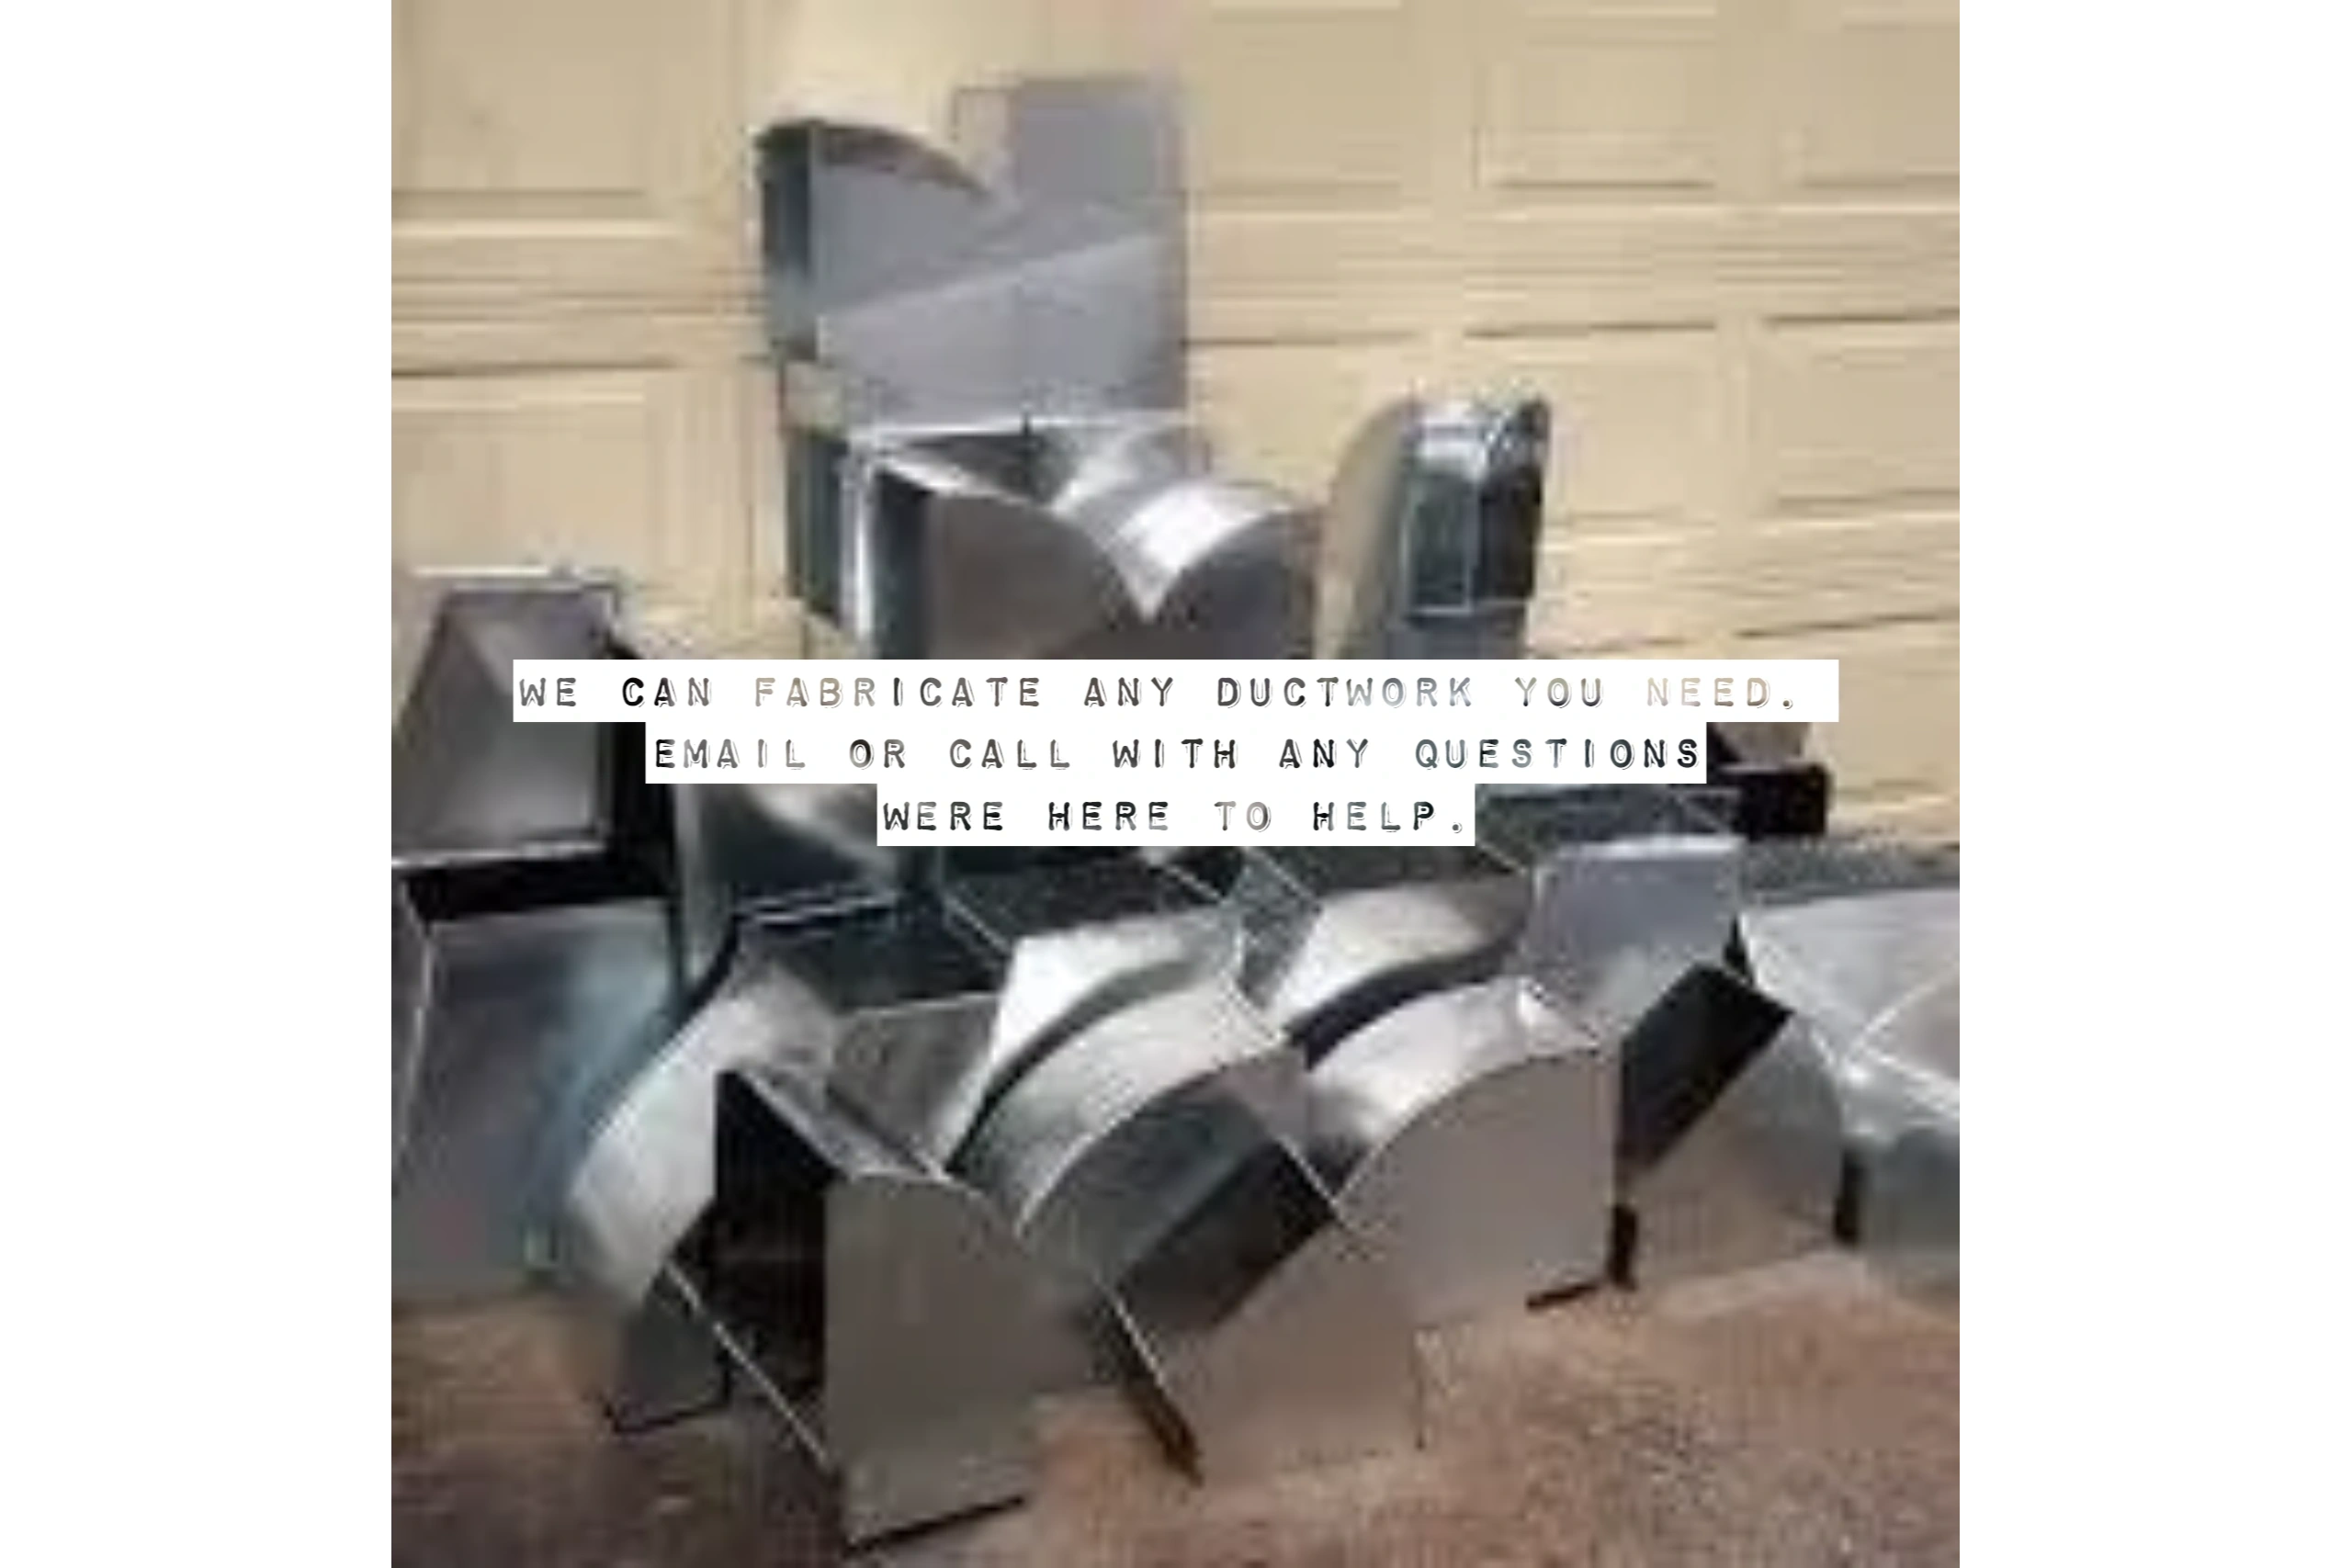 Sheetmetal supply - Air Conditioning Ductwork, Hvac, Hvac Ductwork